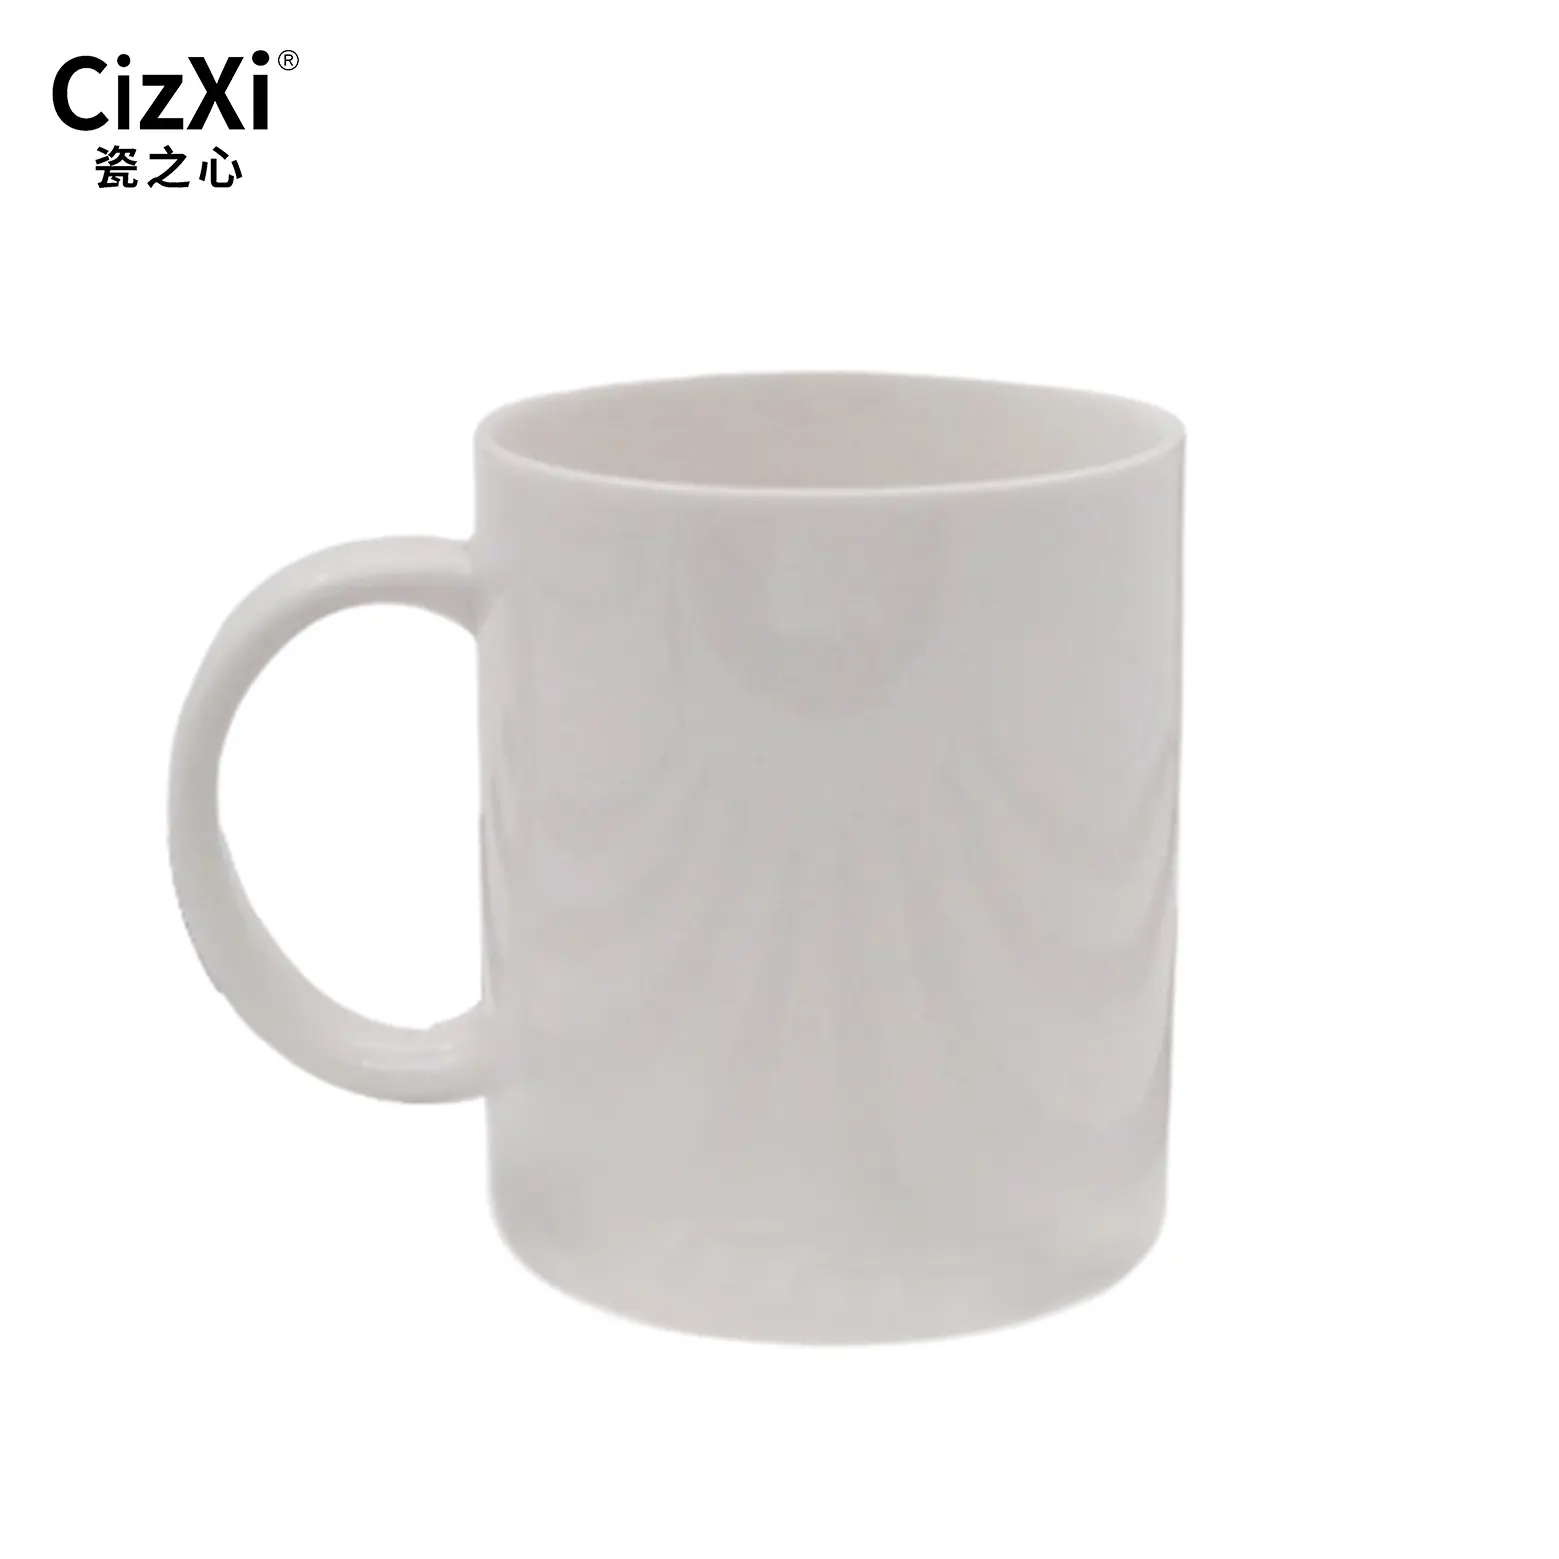 Hot sale eco-friendly ceramic blank white promotion coffee water mug for store hotel restaurant home company personal using